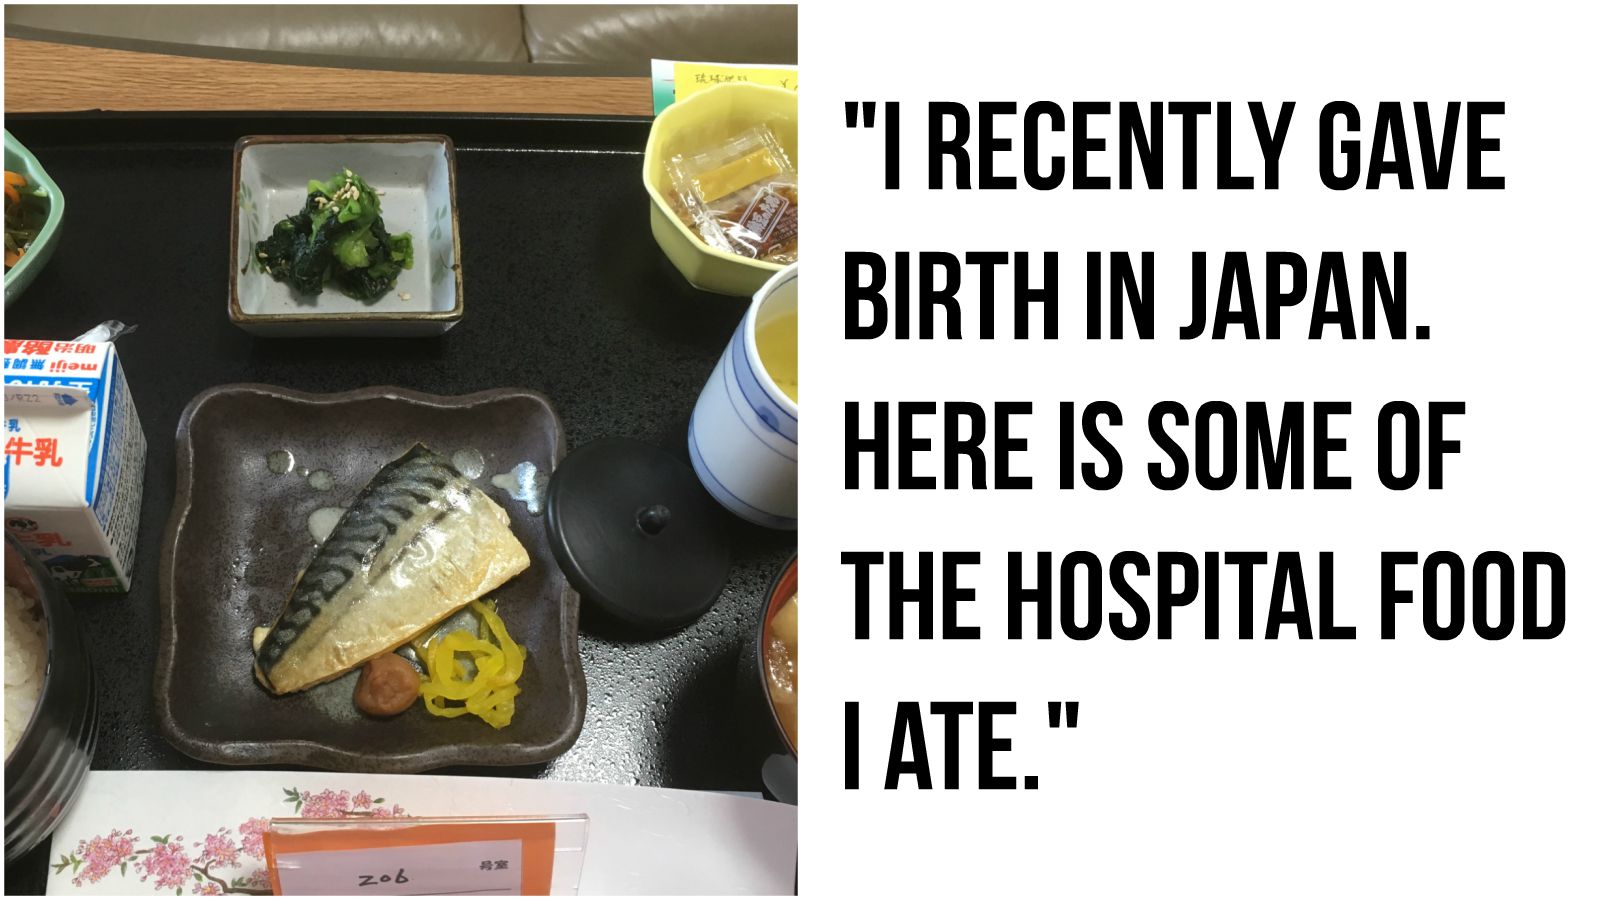 Woman Photographs Hospital Food She Ate After Giving Birth in Japan